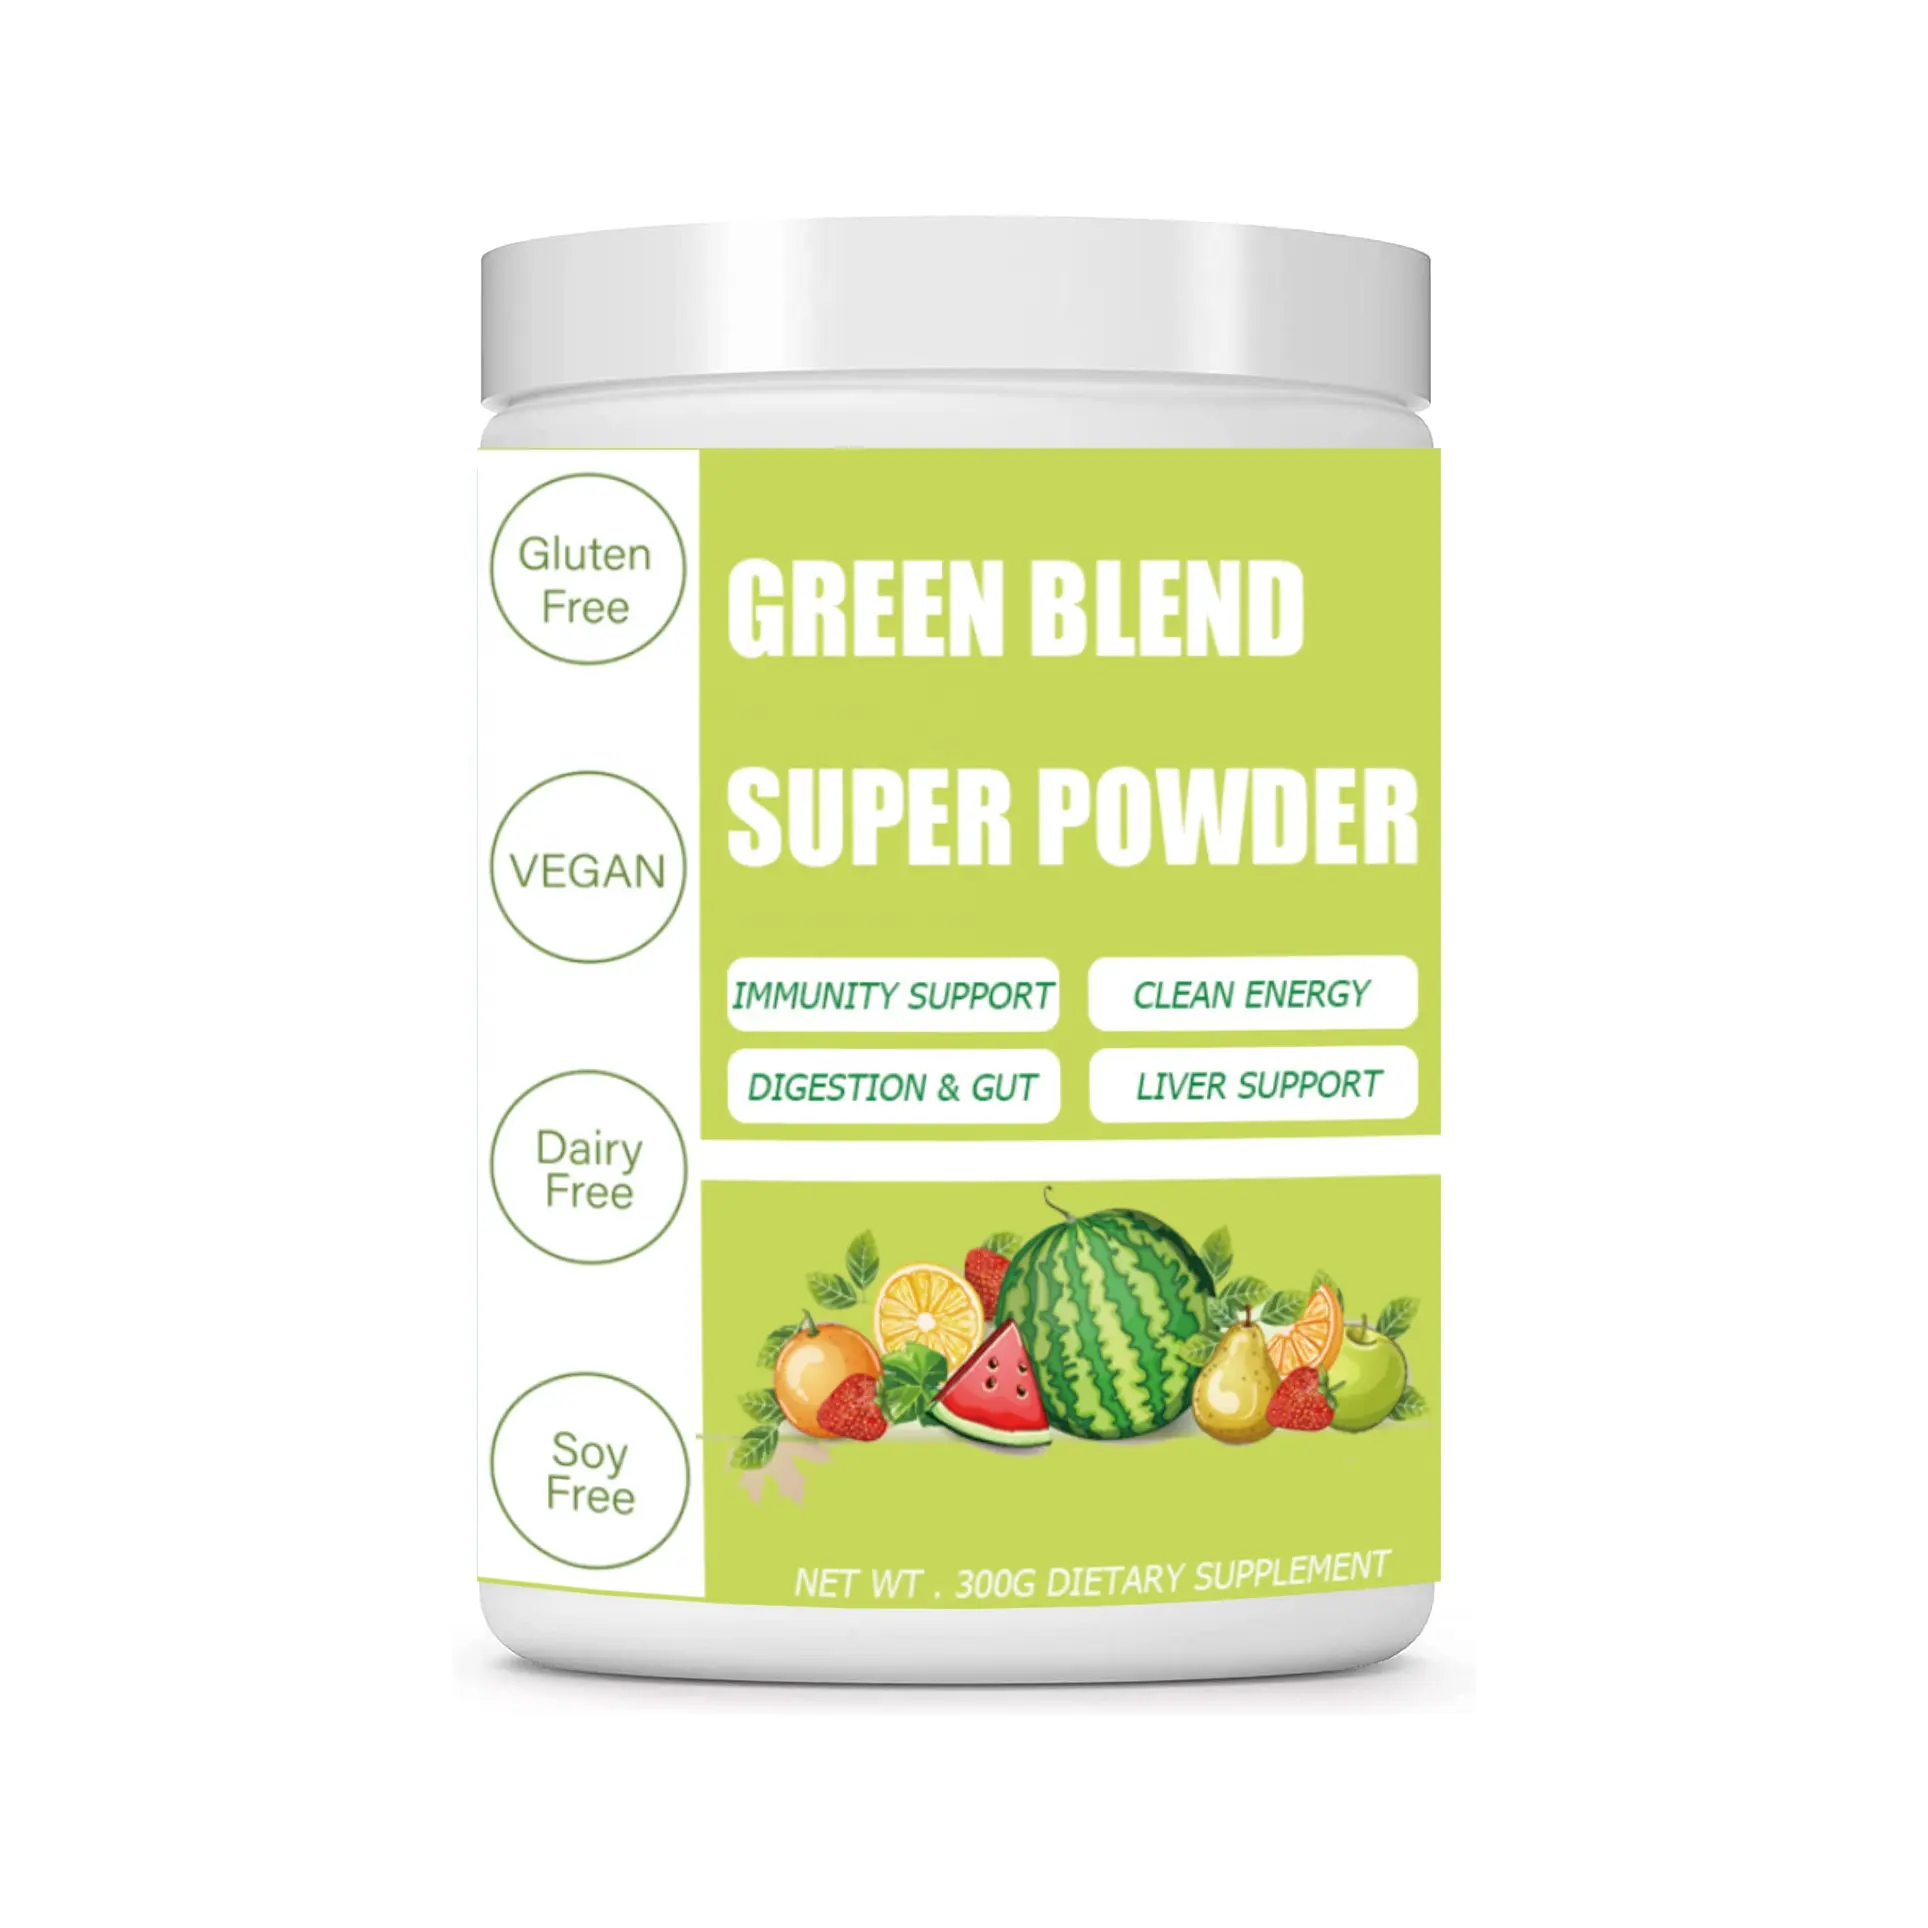 Private Label Greens Powder Smoothie Mix Purely Inspired Organic Powder Superfood